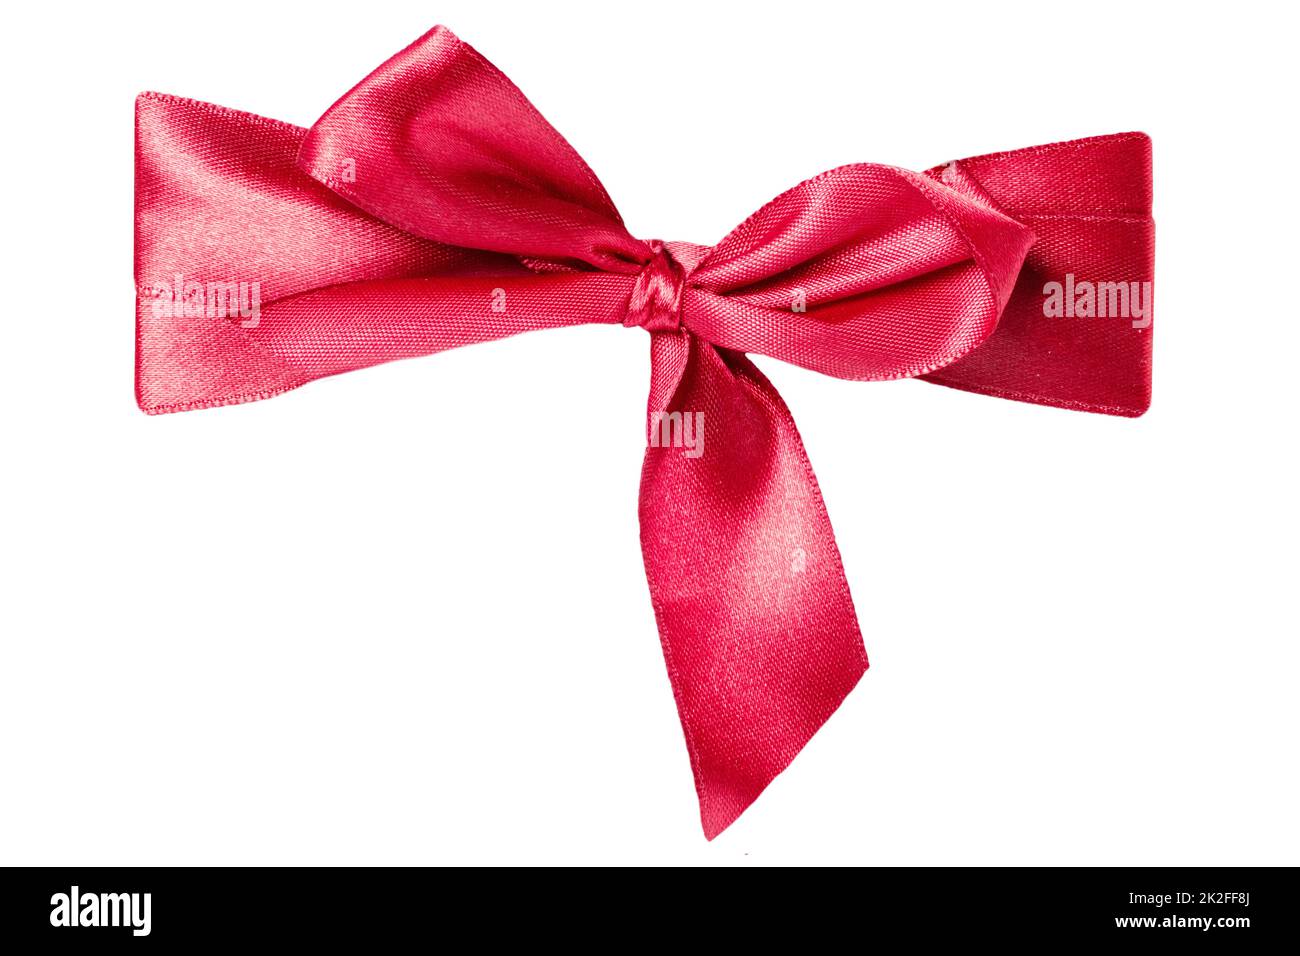 Gift bows. Closeup of a decorative red ribbon bow made of silk for gift box isolated on a white background. Decorations background. Macro photograph. Stock Photo